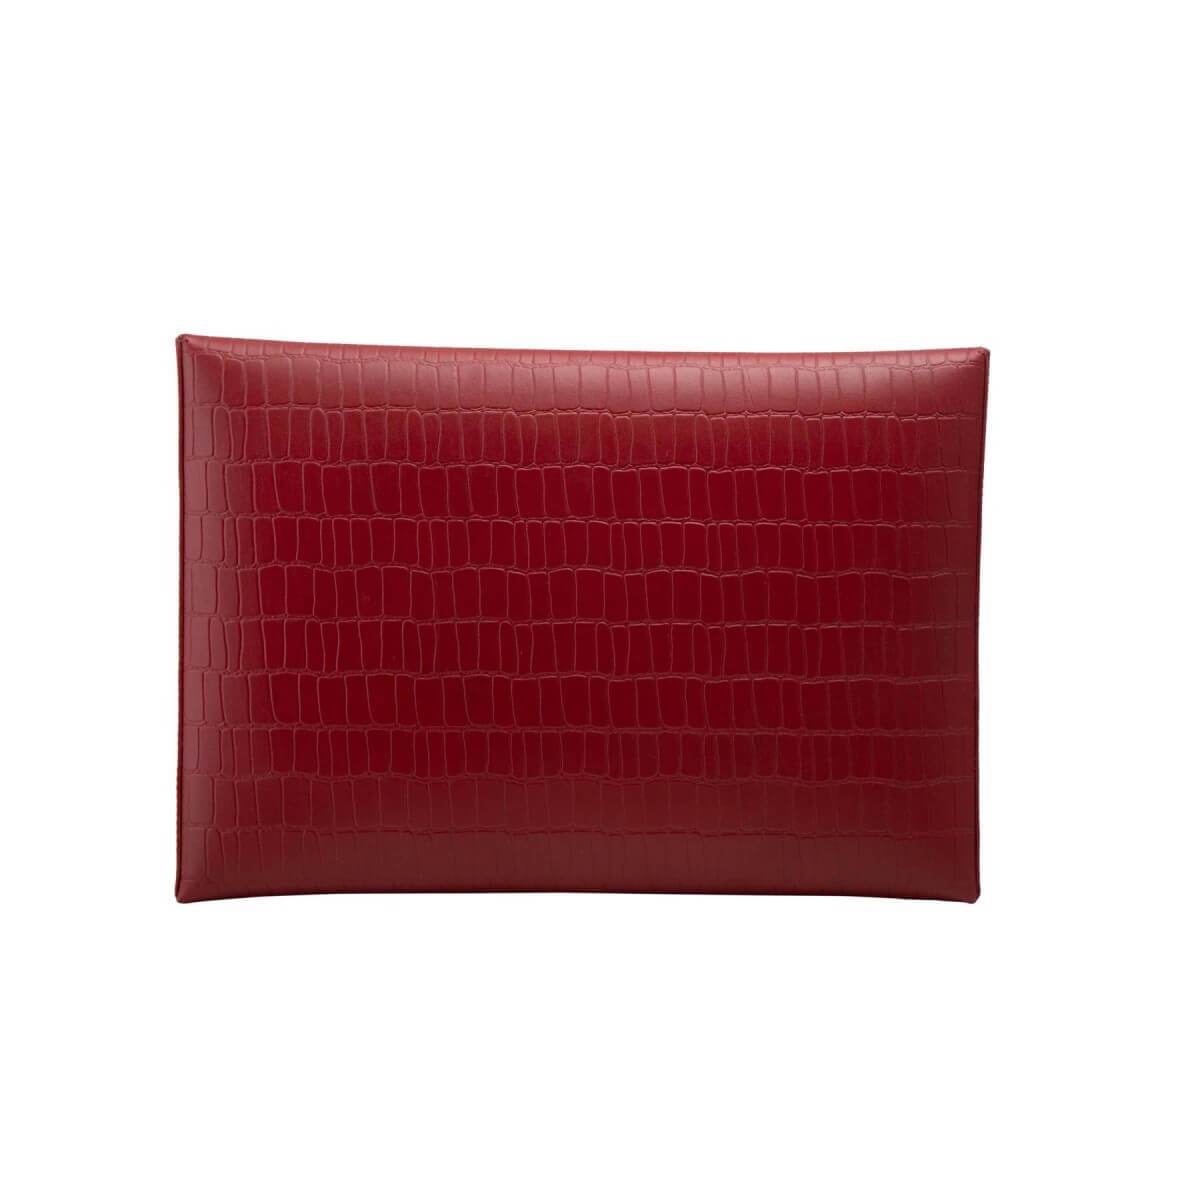 Red Nile Leather Laptop Sleeve